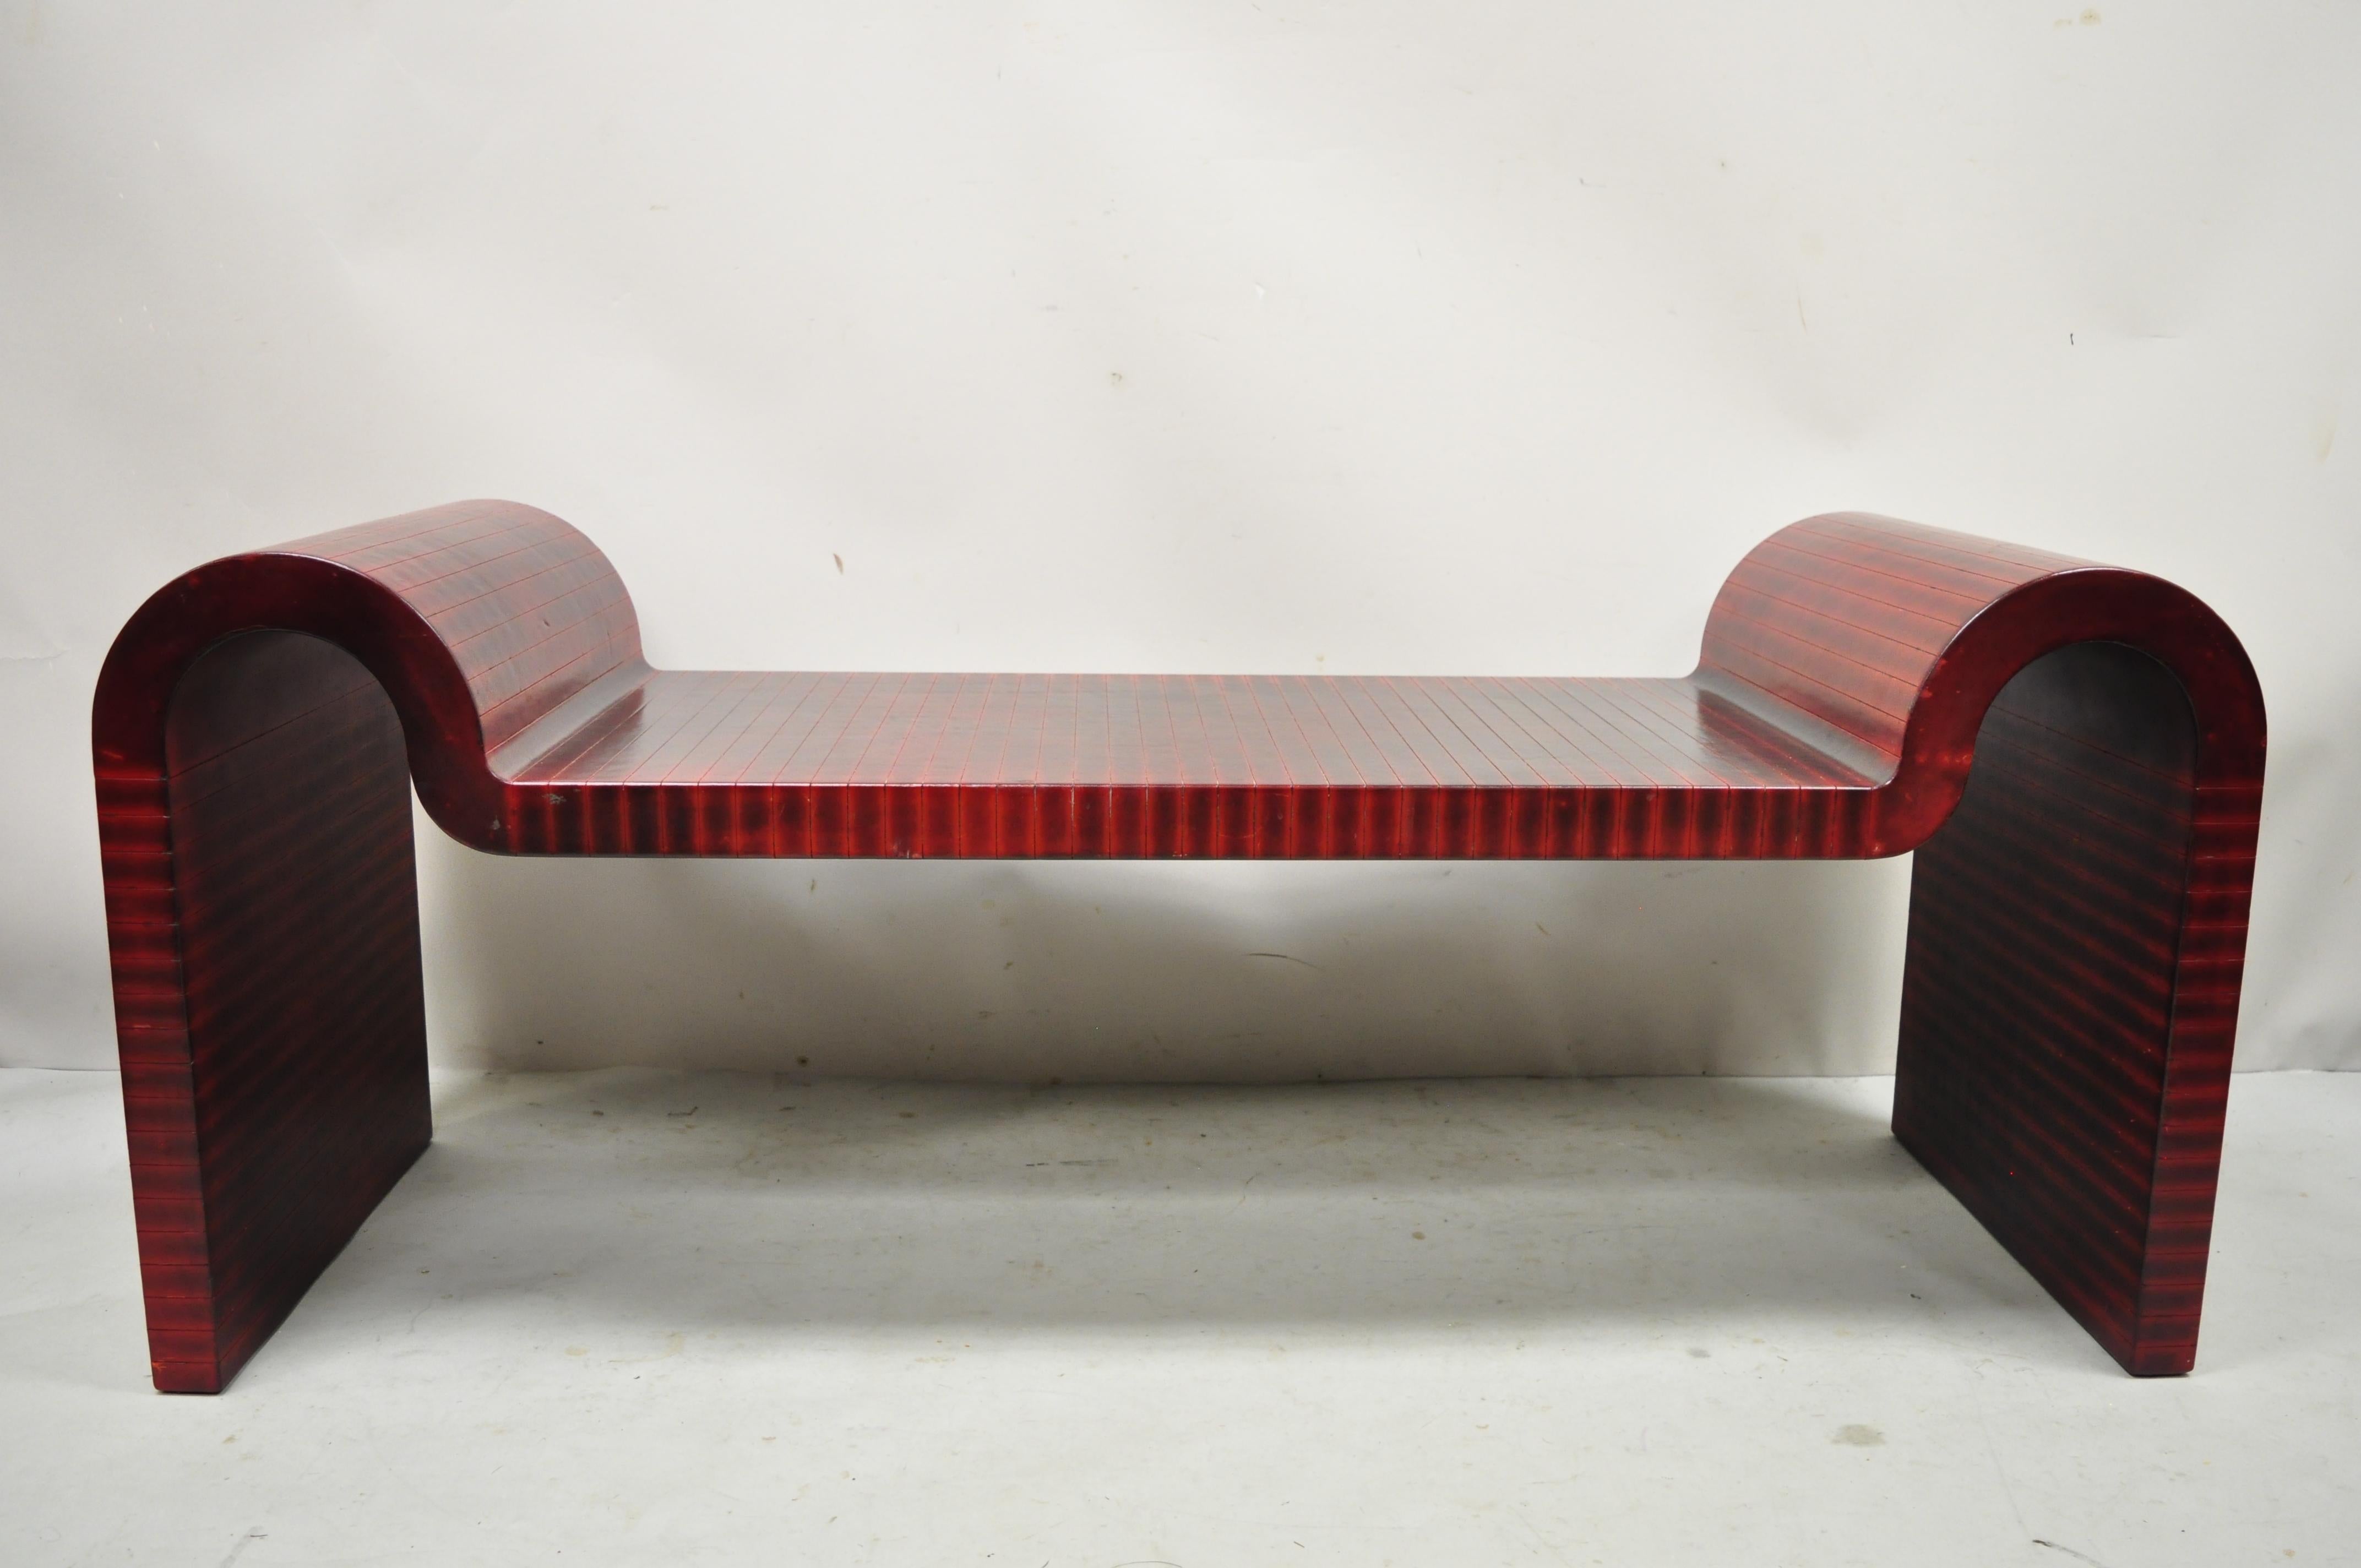 Karl Springer Red Leather Art Deco sculptural waterfall bench Mid-Century Modern. Item features red burnished leather wrapped frame, sleek waterfall design, loose cushion, solid wood frame, very nice vintage item, clean modernist lines, sleek